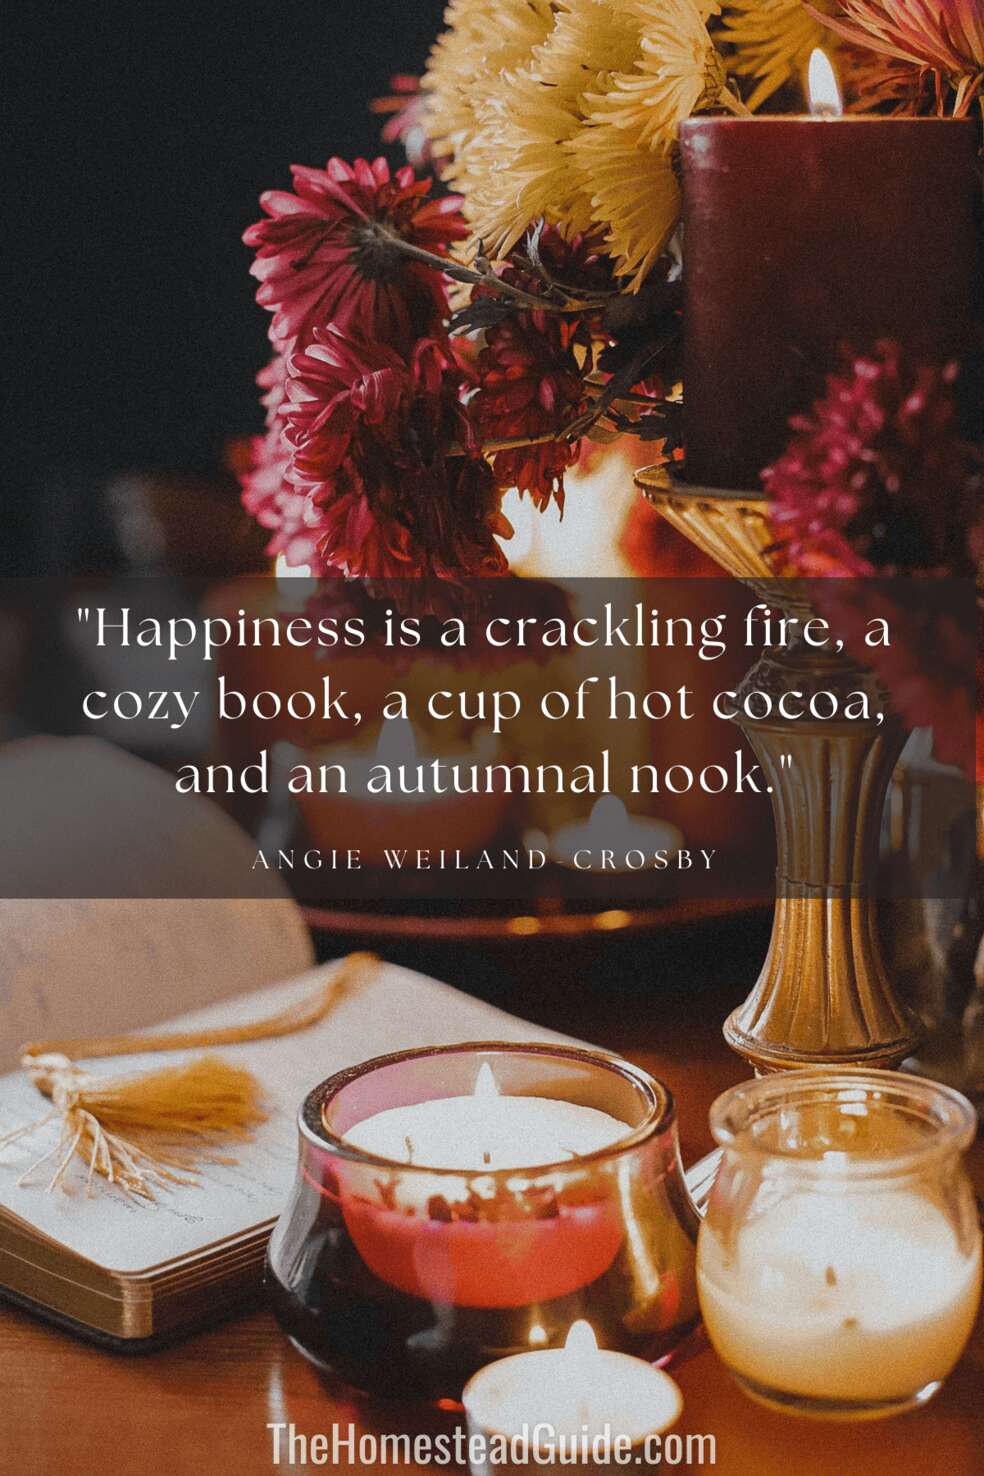 Happiness is a crackling fire, a cozy book, a cup of hot cocoa, and an autumnal nook.